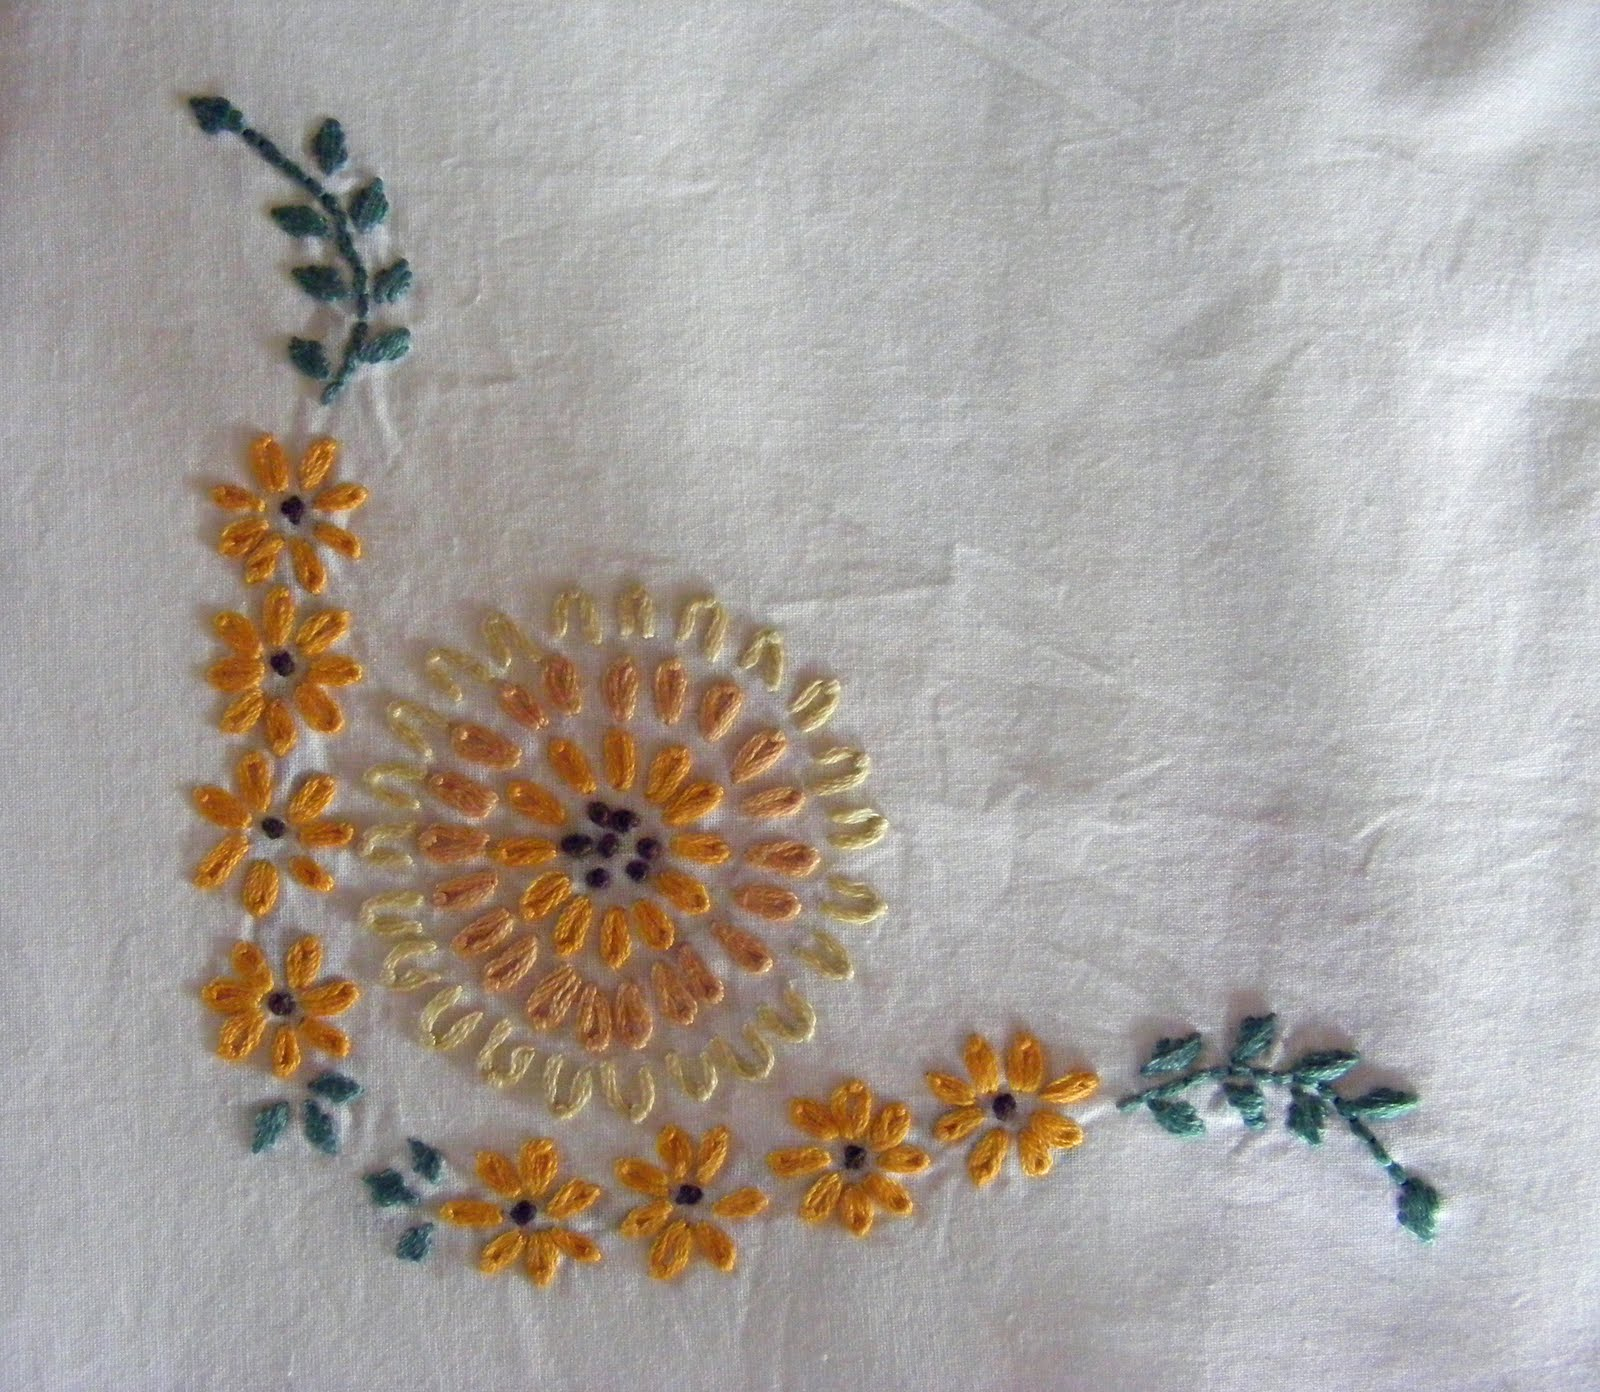 Hand Embroidery Patterns For Pillowcases 1000 Images About Embroidery On Pinterest Embroidered Hand